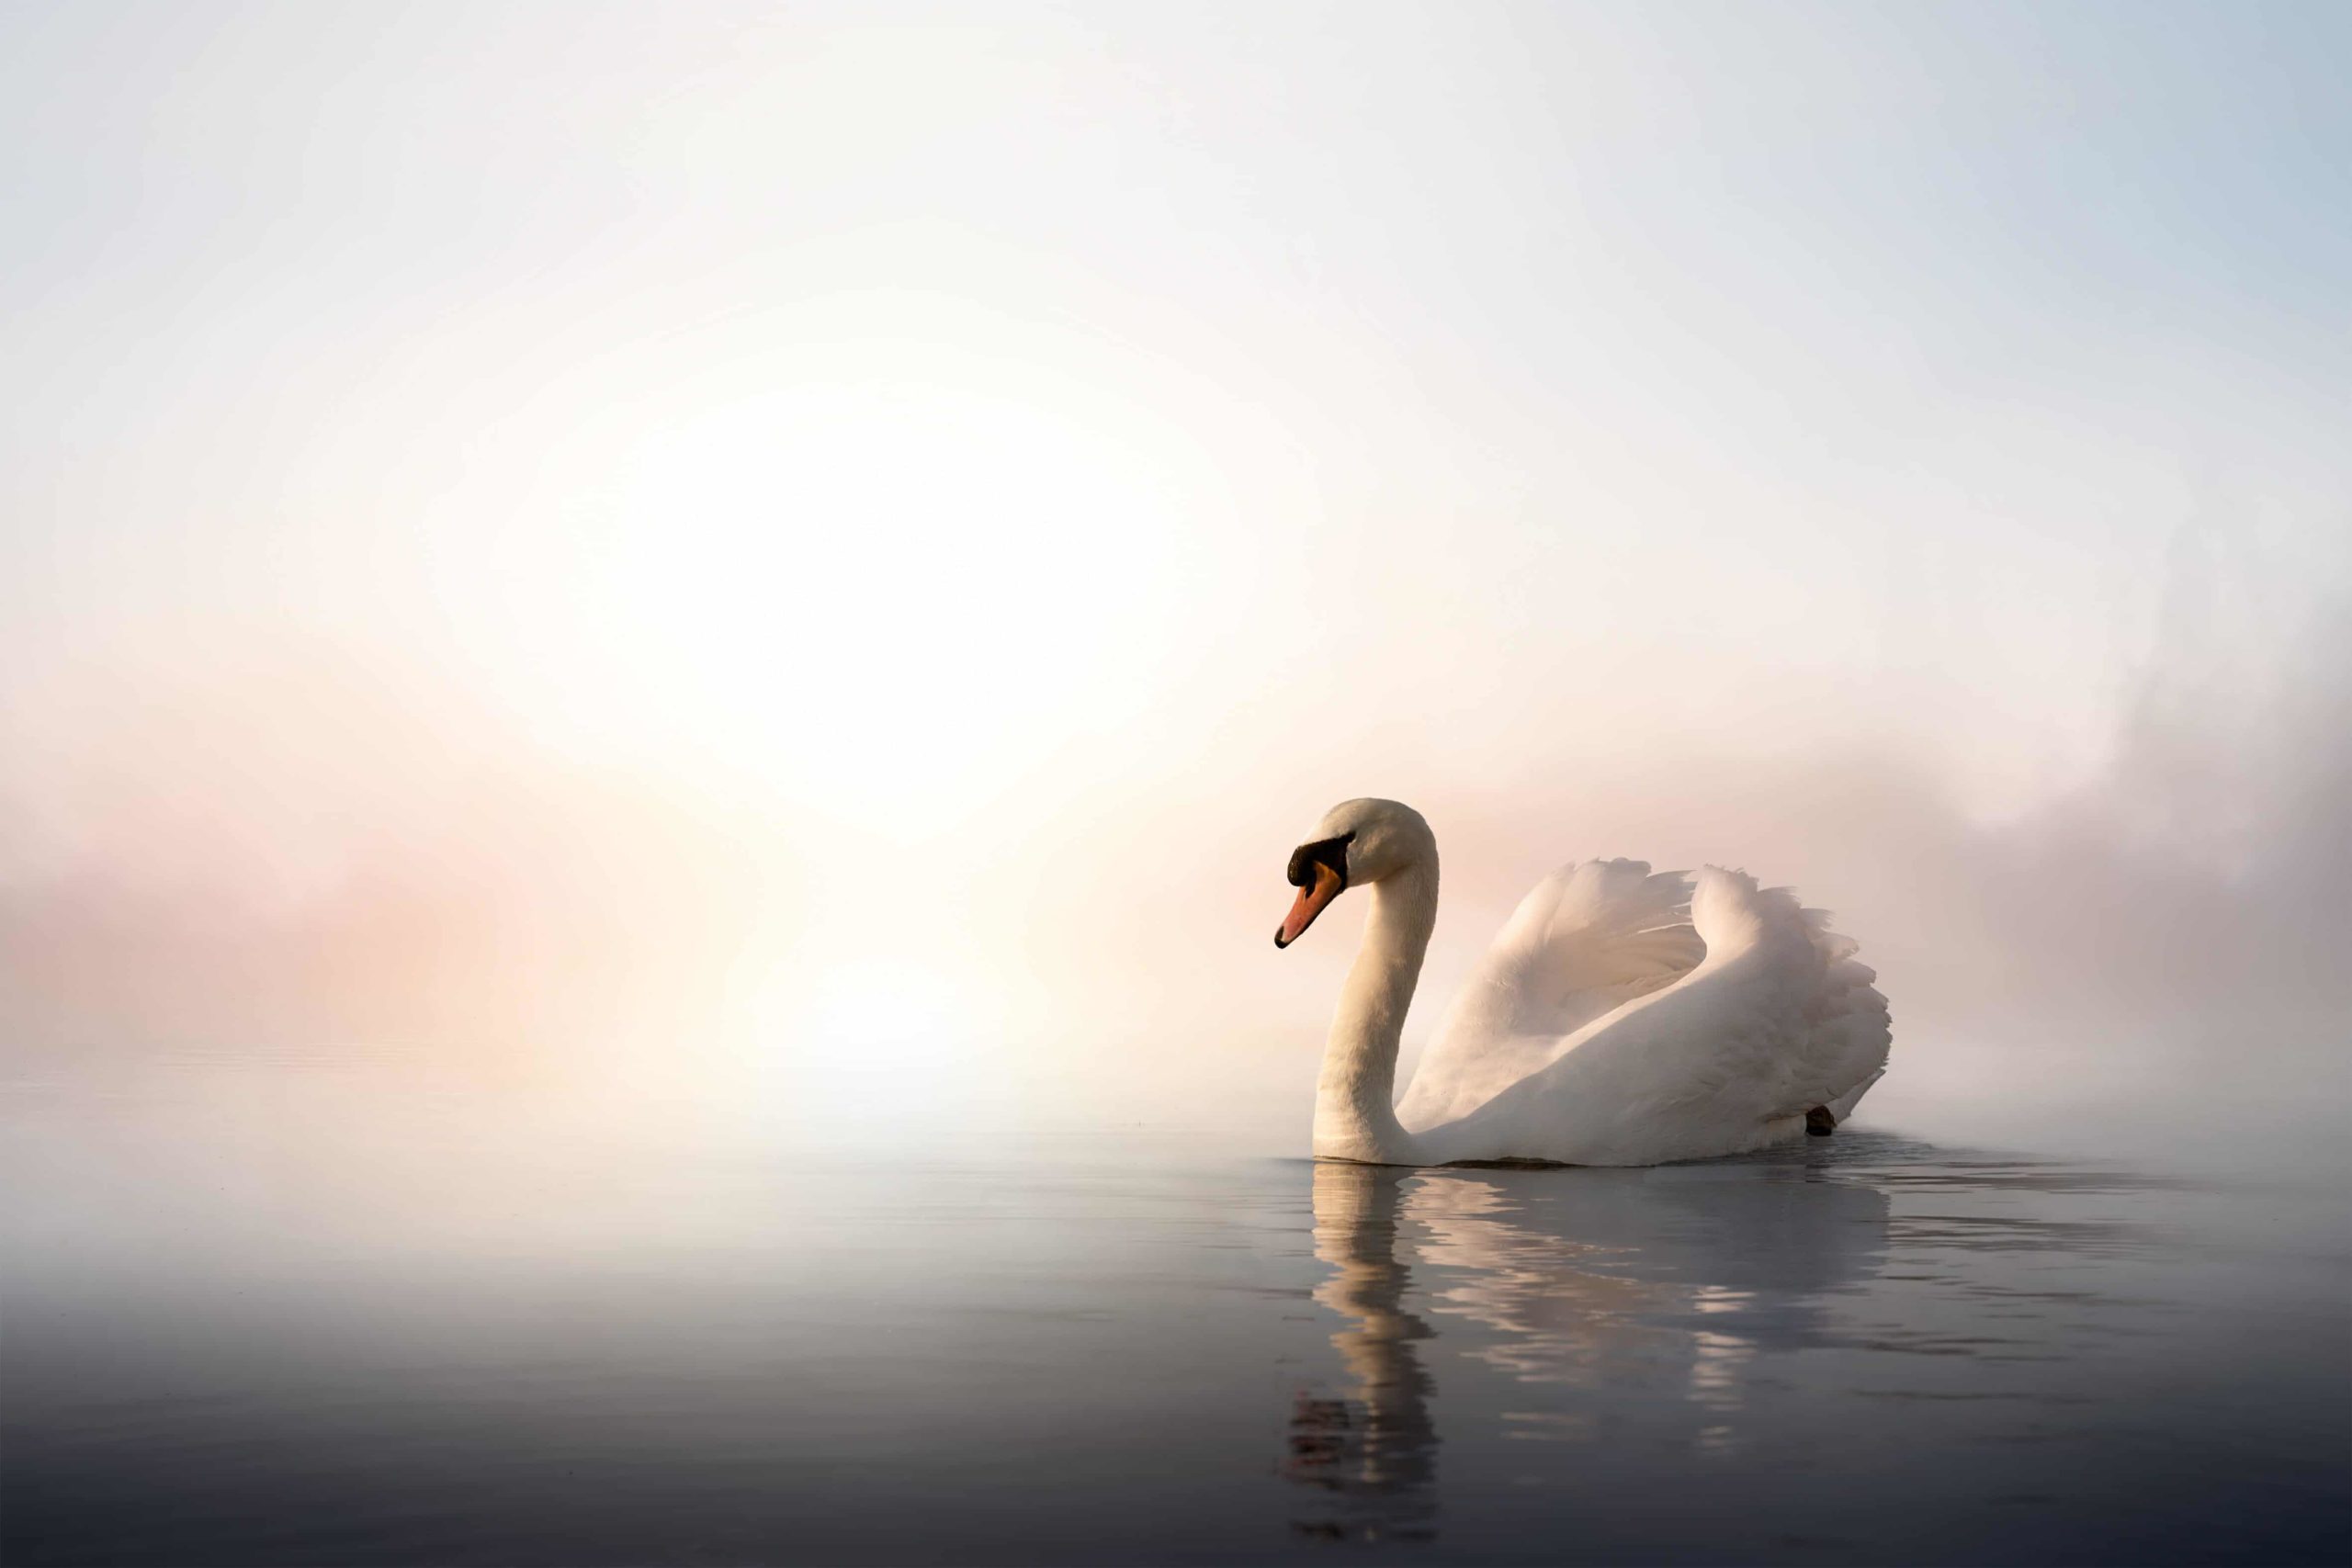 White swan in still water with blurred background.